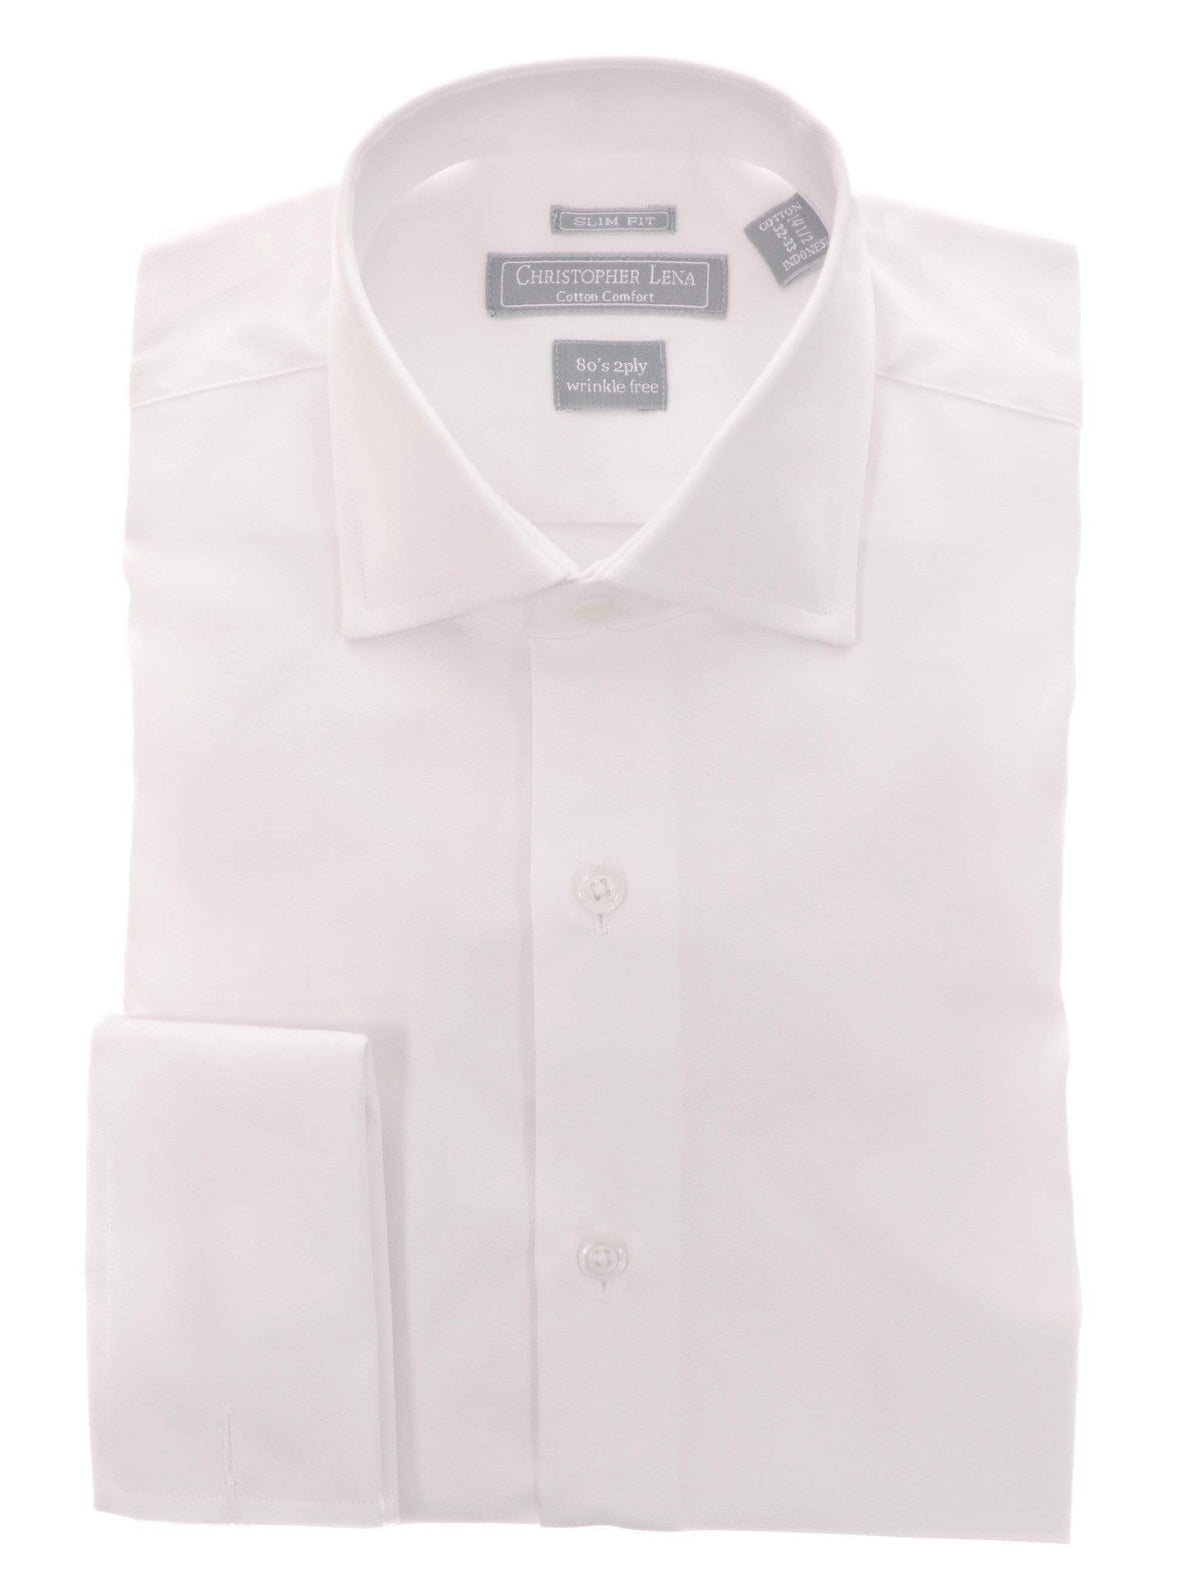 Christopher Lena Bestselling Items 17 1/2 34/35 Slim Fit Solid White French Cuff Wrinkle Free 80&#39;s 2ply Cotton Dress Shirt